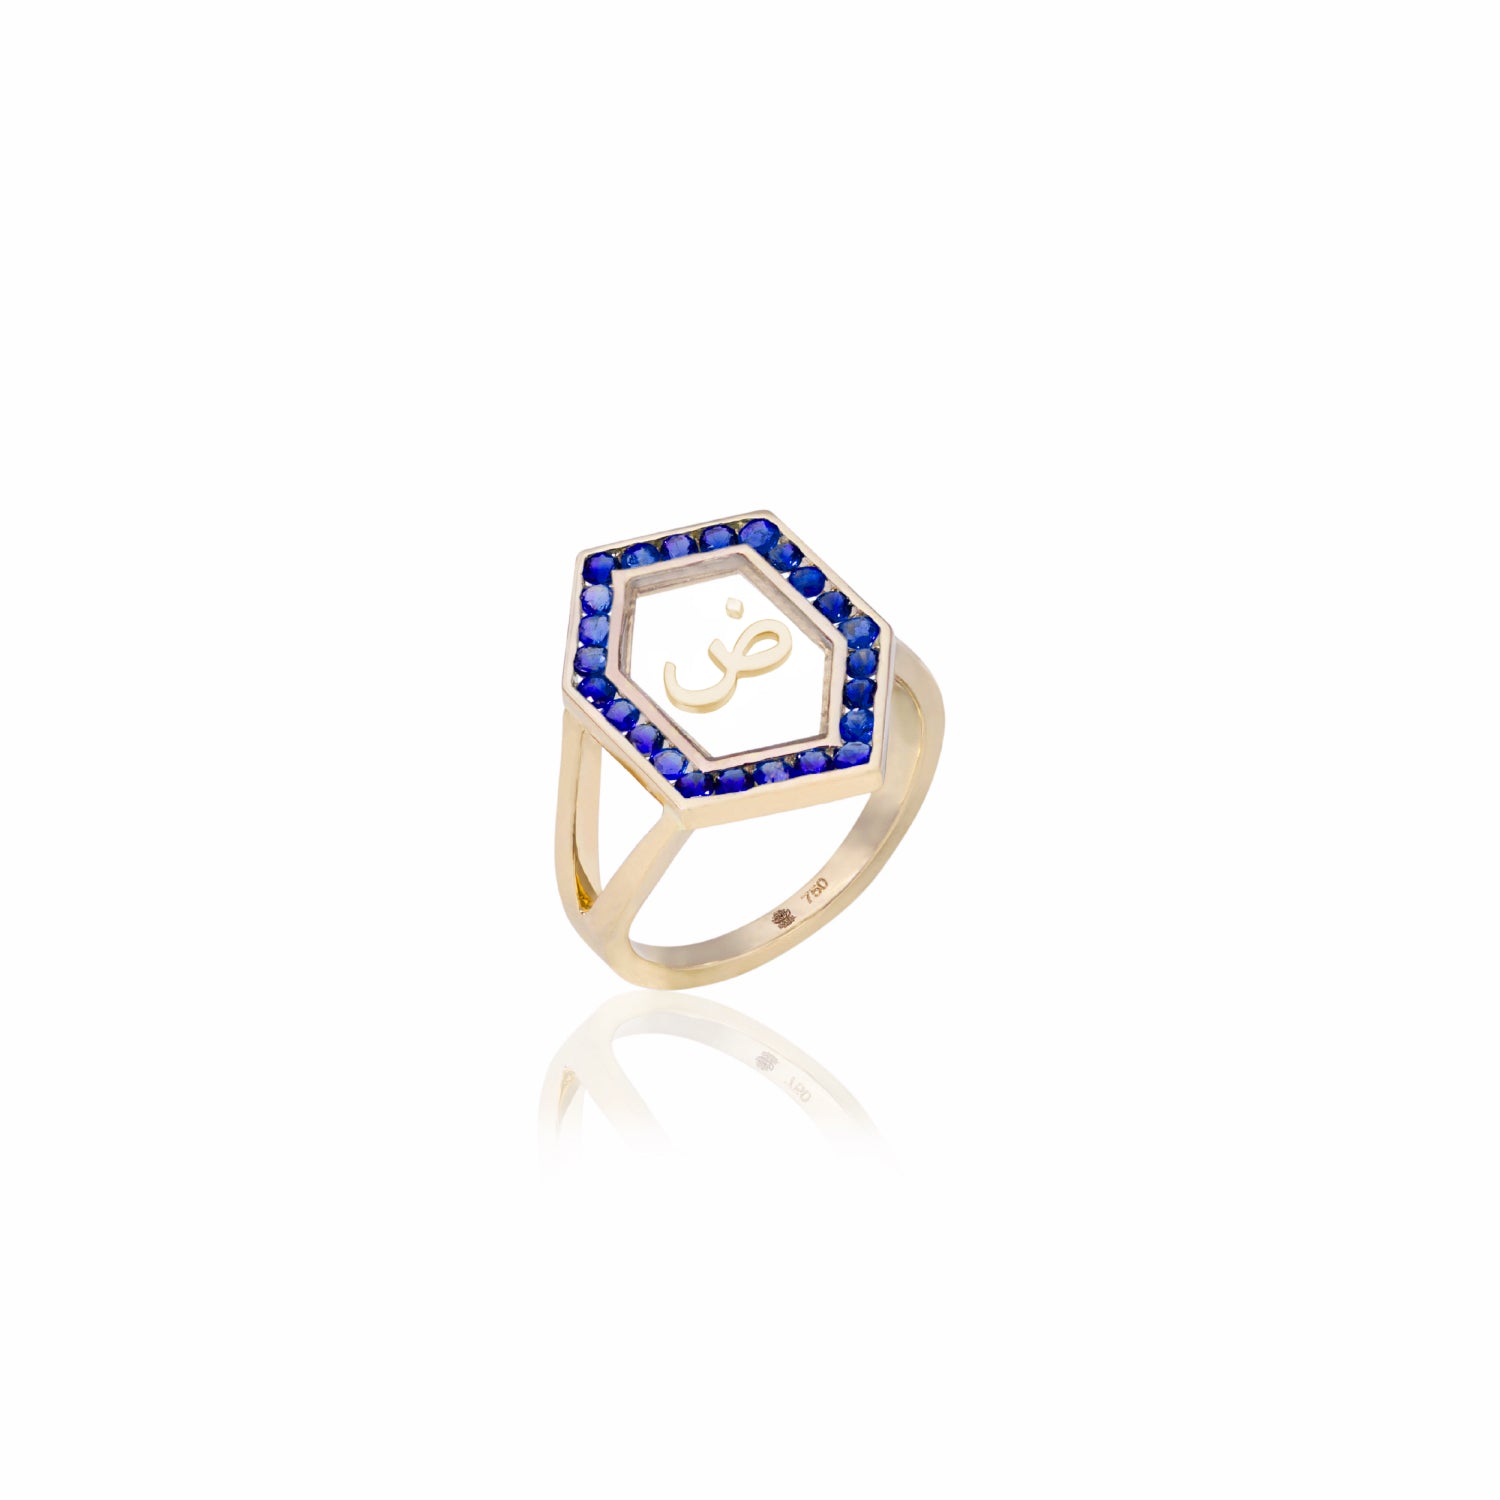 Qamoos 1.0 Letter ض Sapphire Ring in Yellow Gold